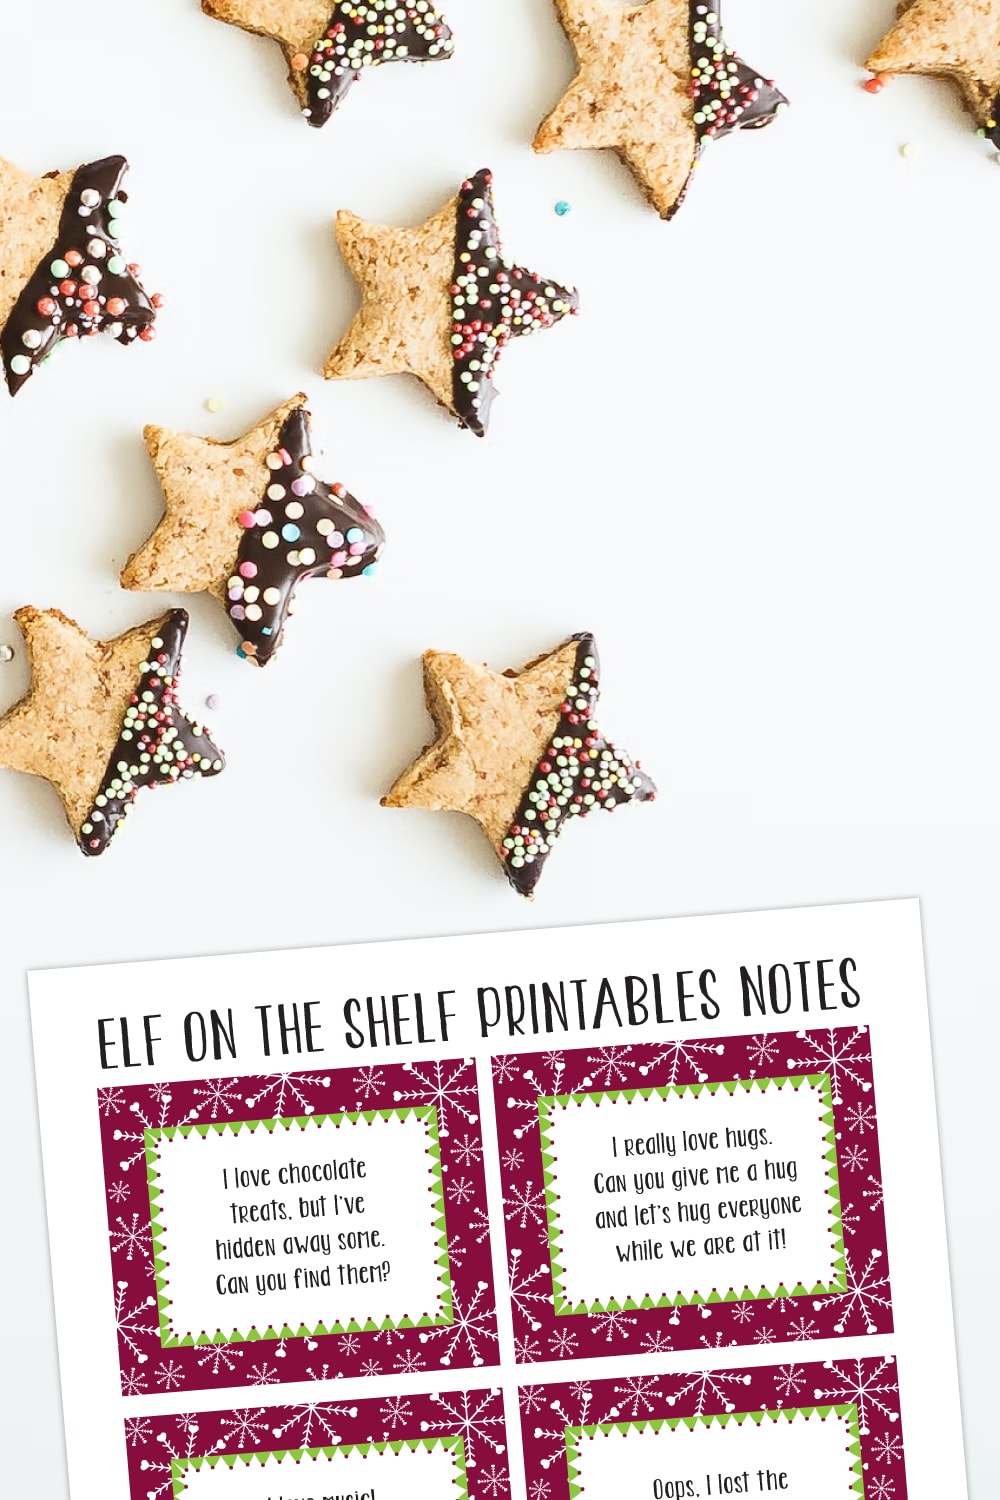 Preview of elf on the shelf notes on white background with scattered star cookies on top.